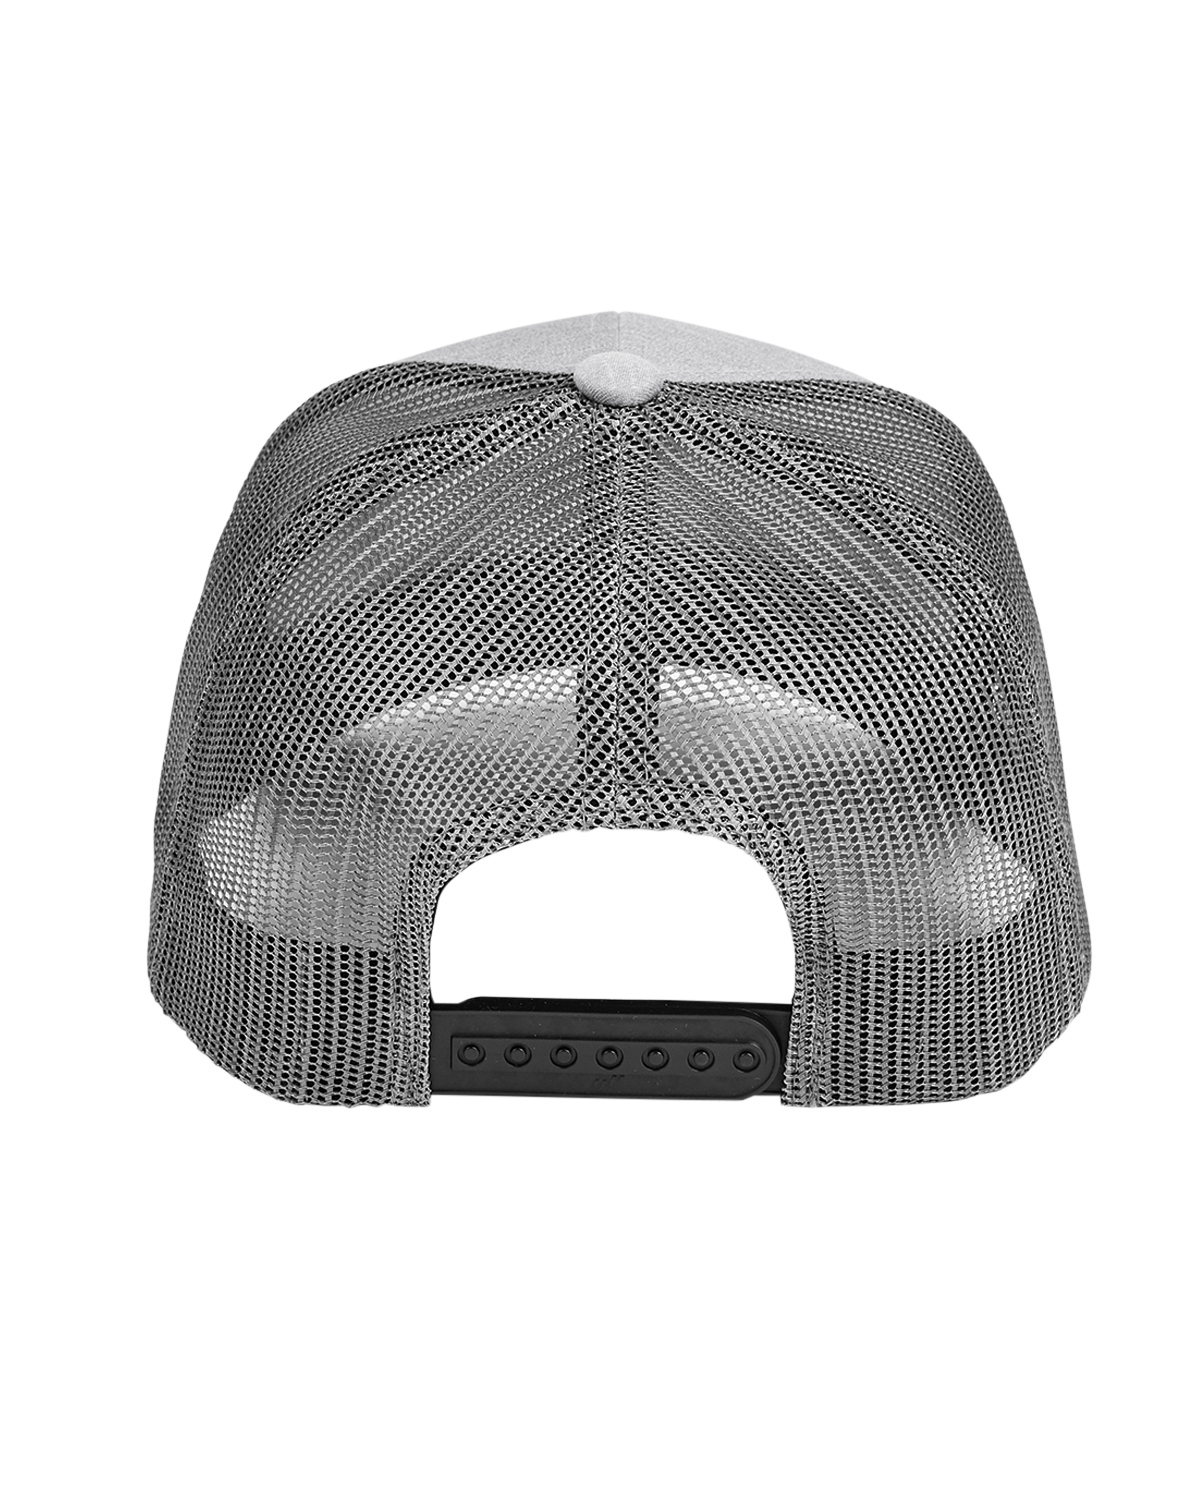 'Team 365 TT802 by Yupoong Adult Zone Sonic Heather Trucker Cap'